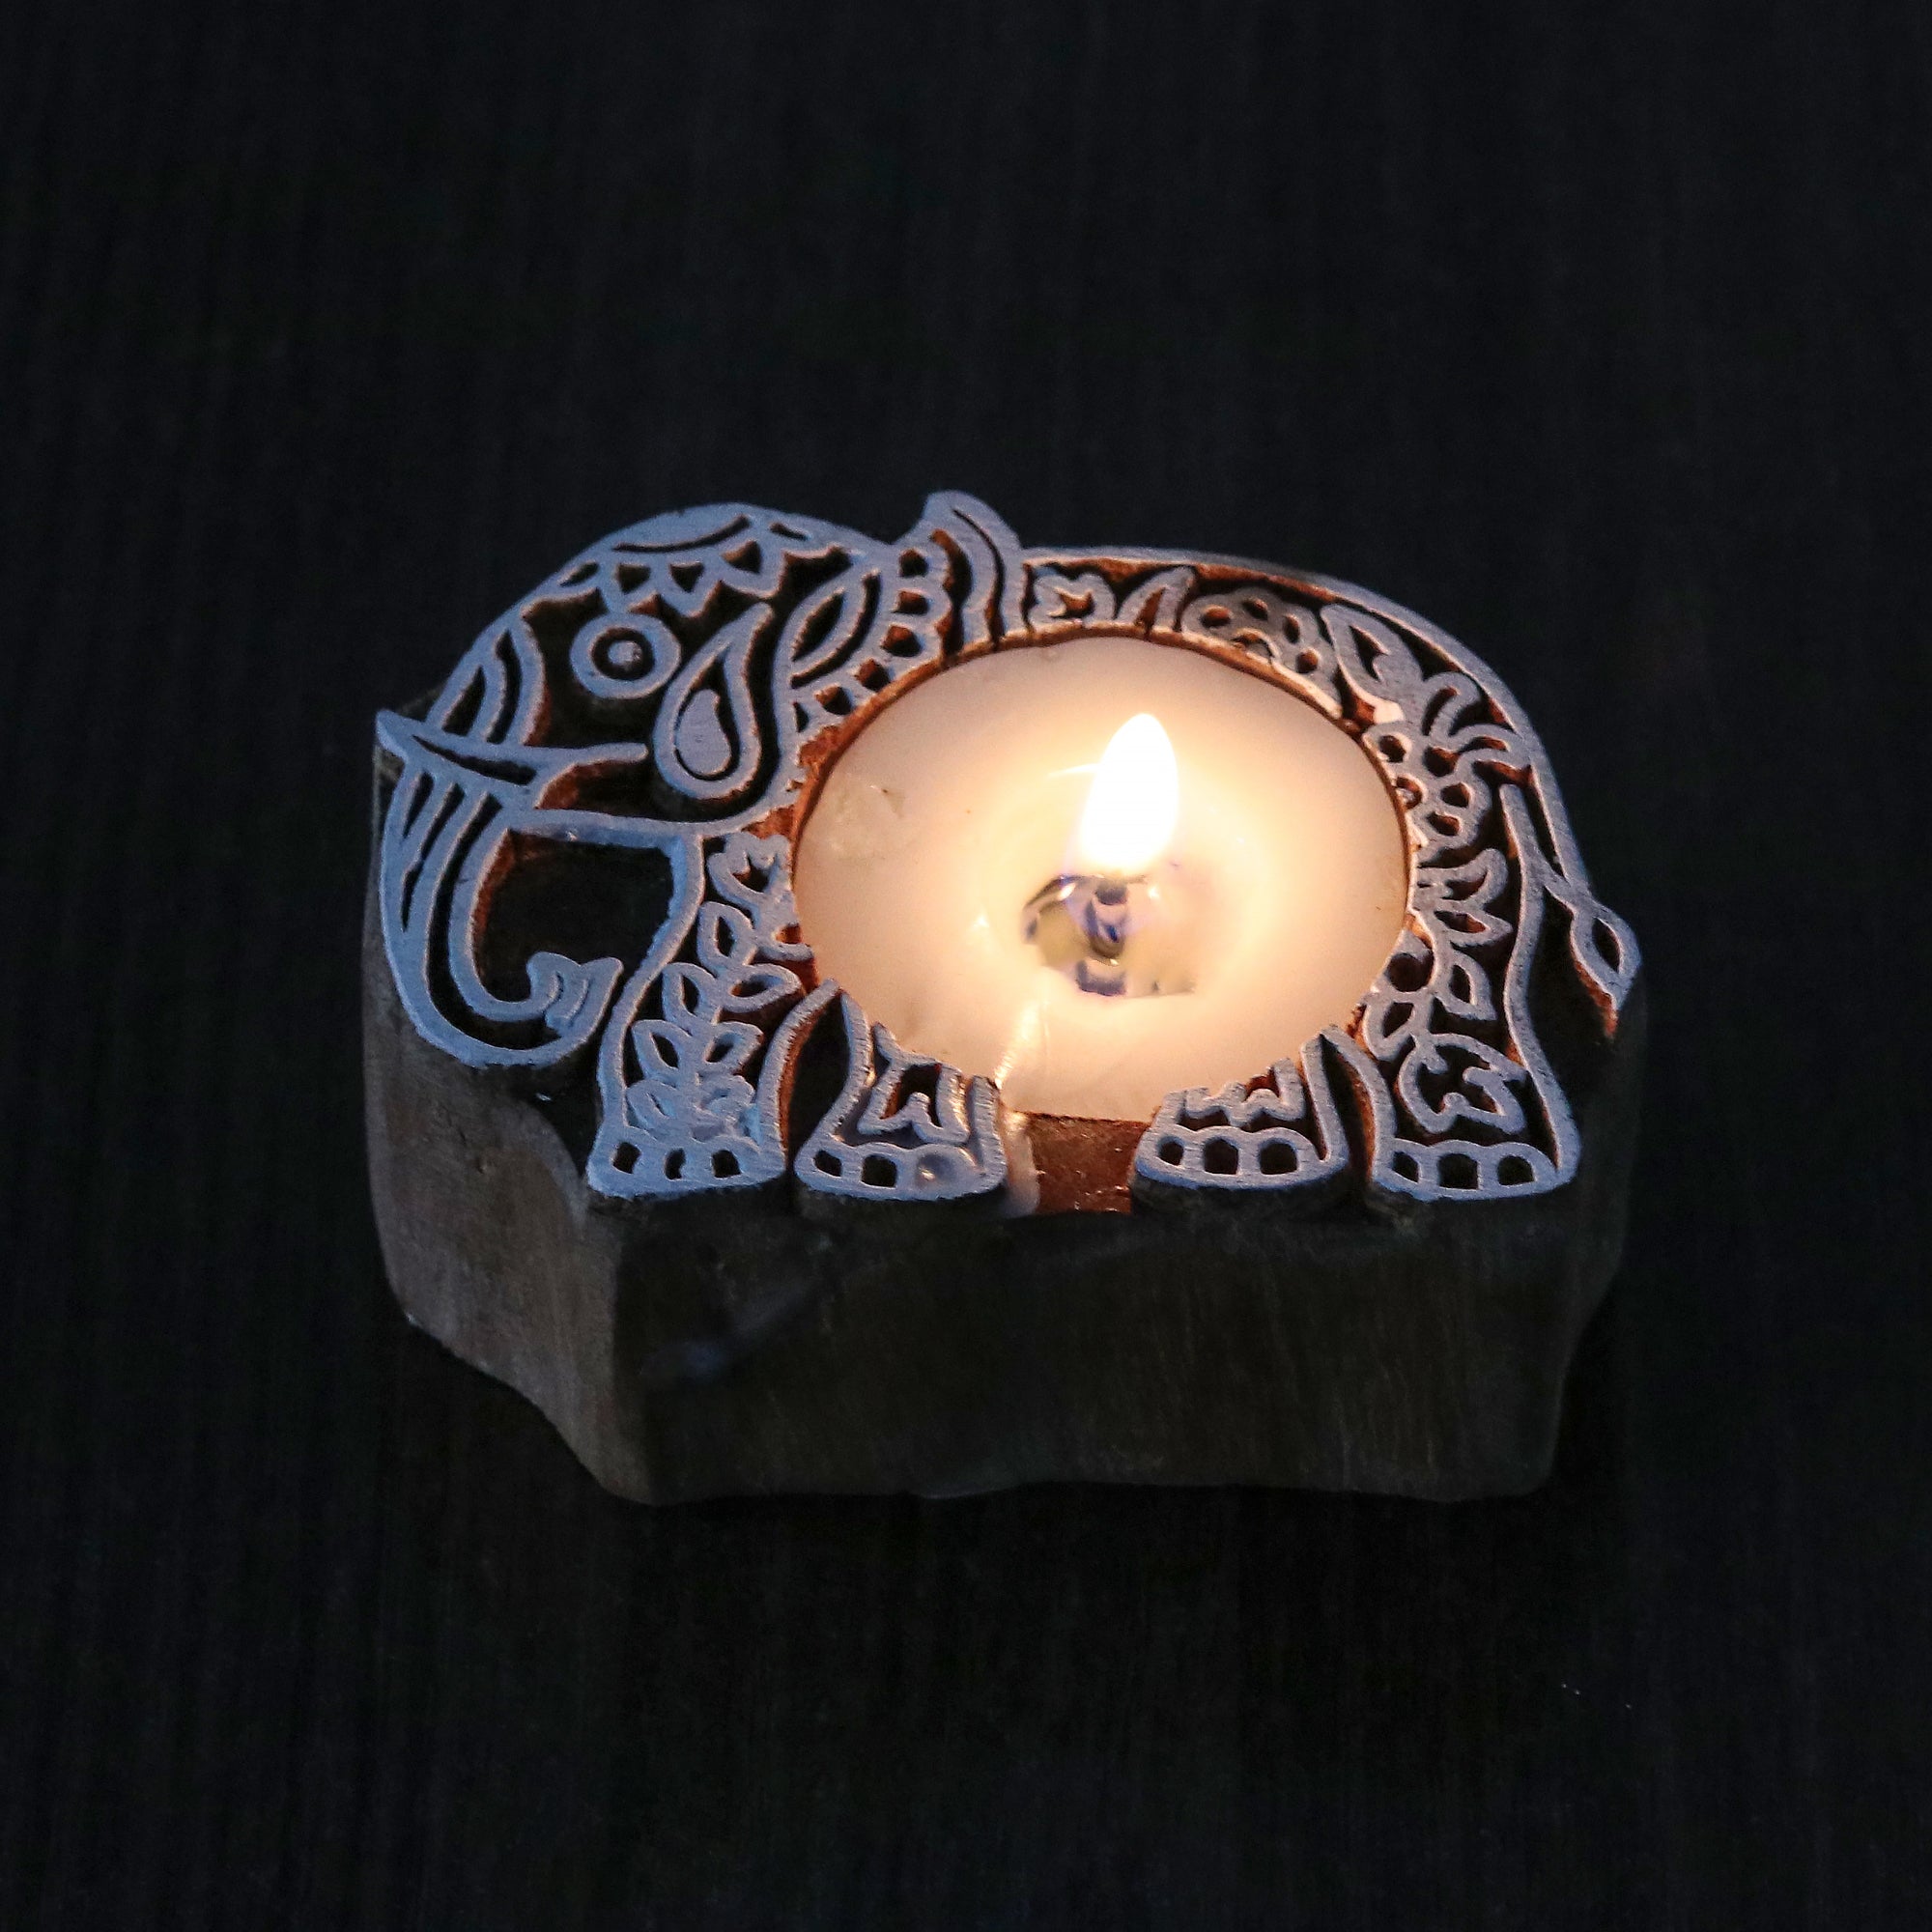 Wooden Printing Block & Candle Holder- Elephant